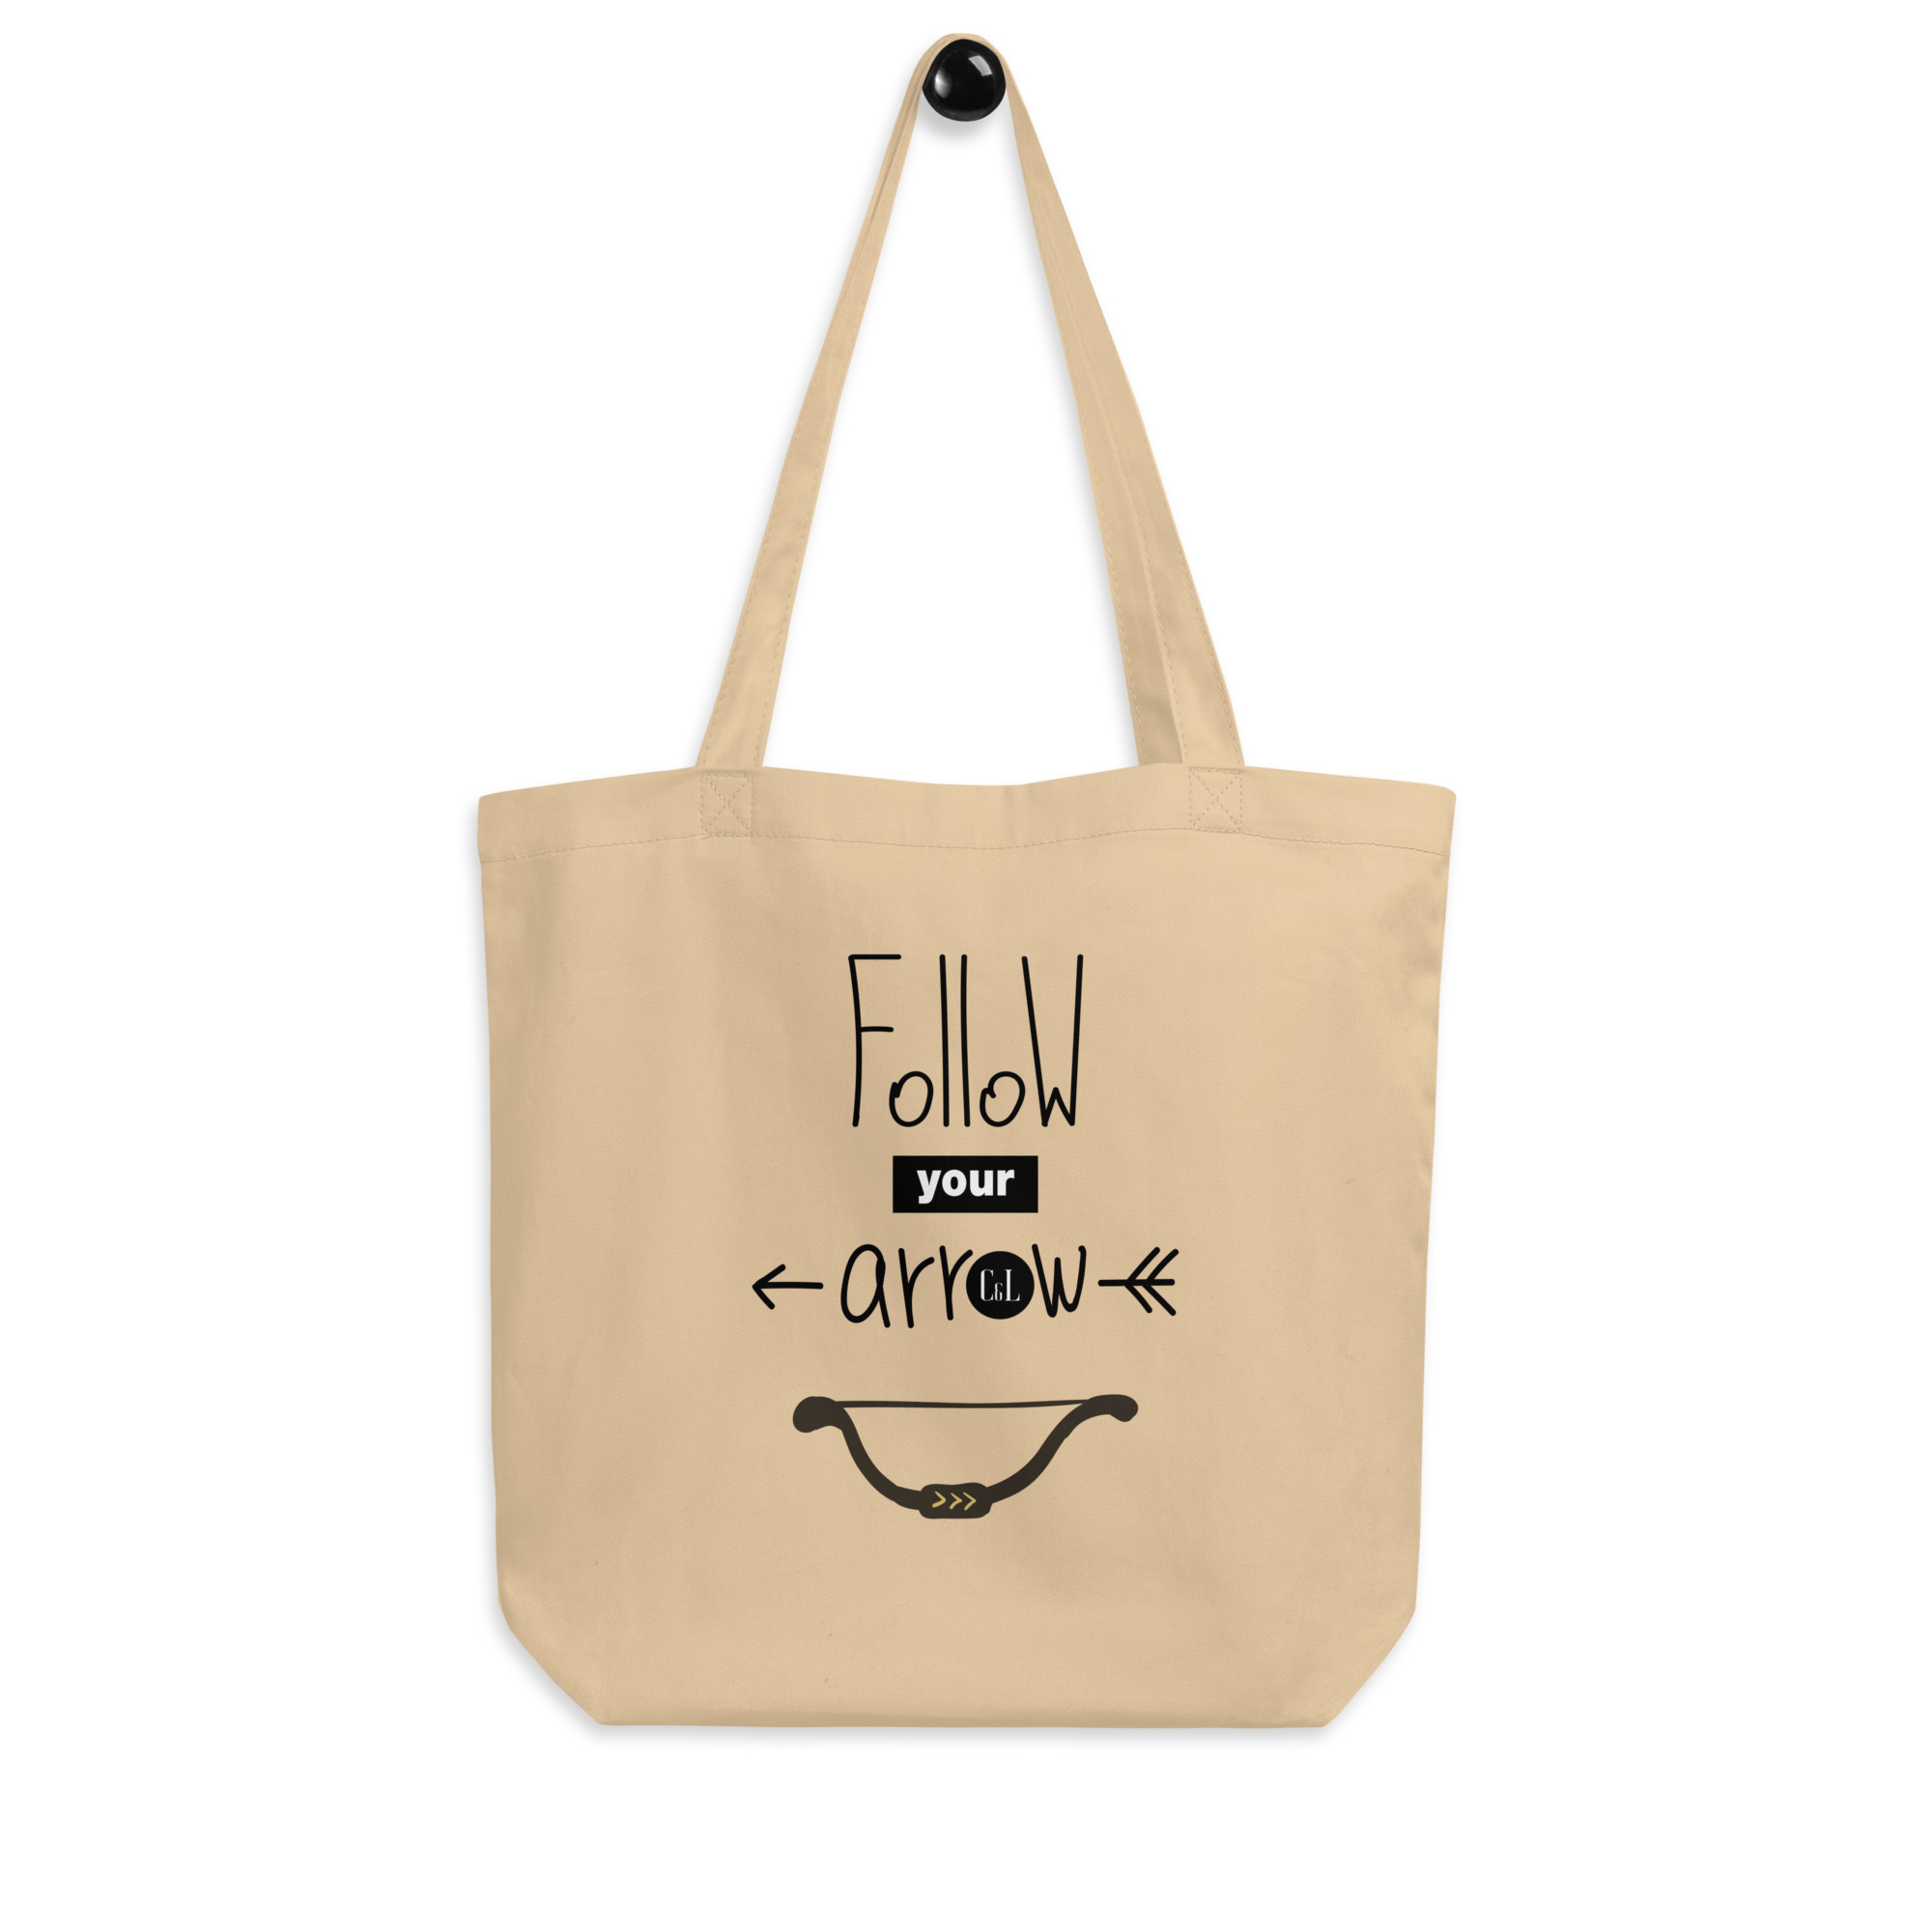 eco-tote-bag-oyster-front-6480527246fb8.jpg